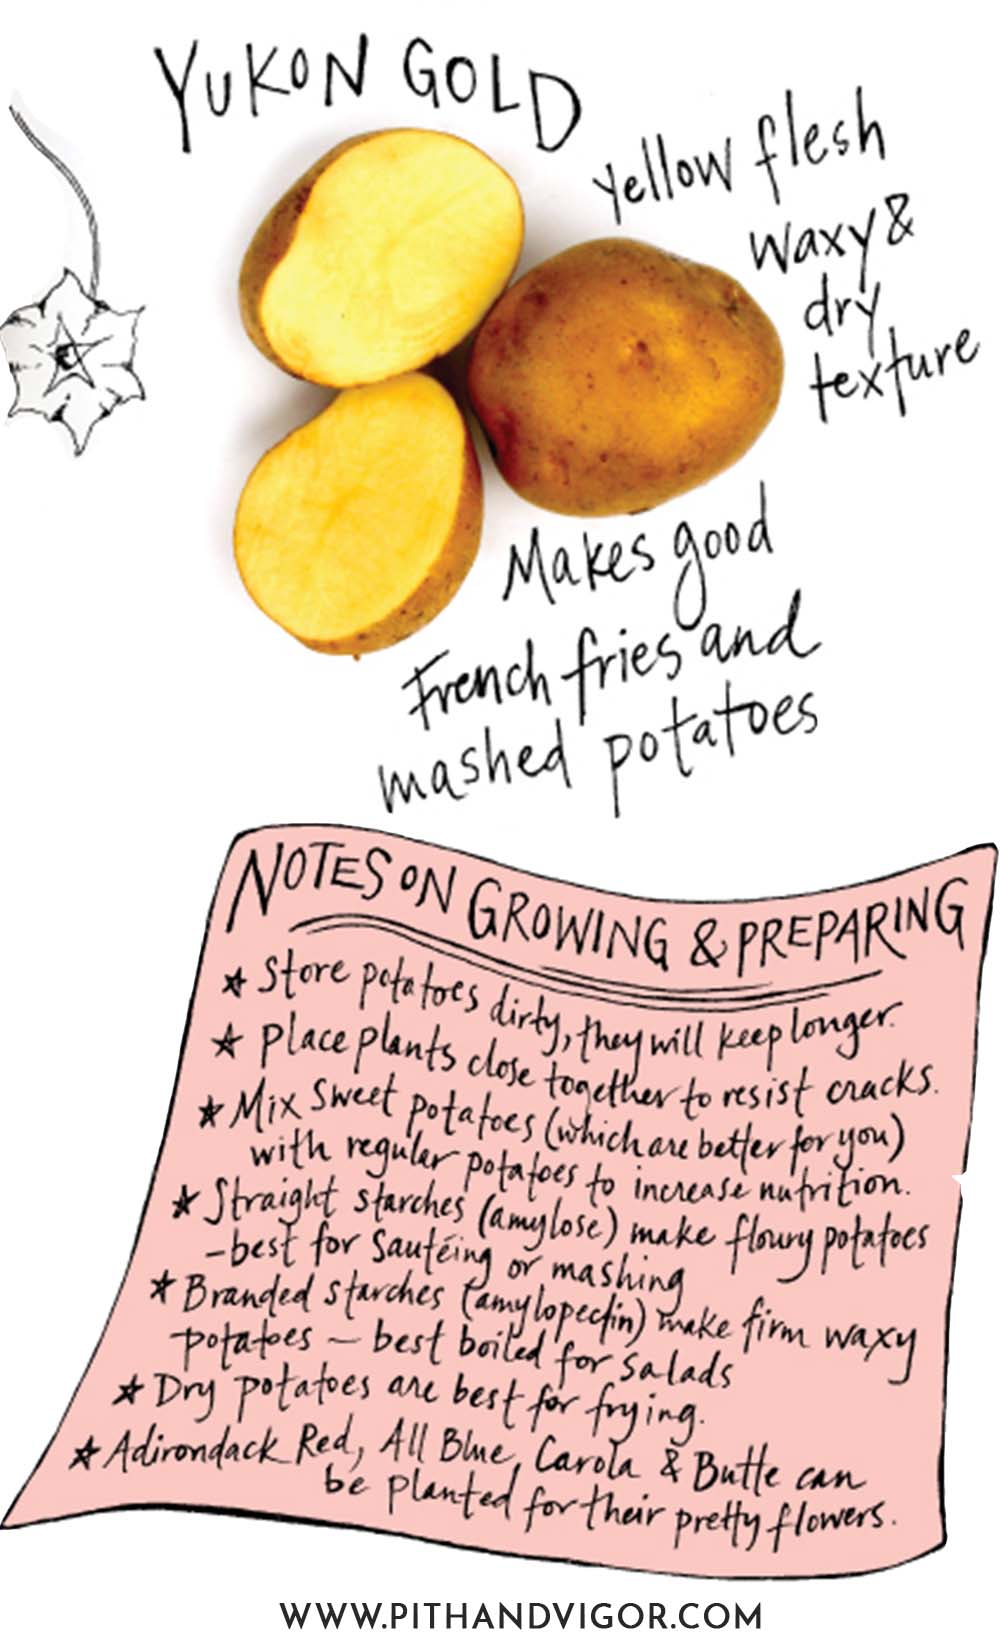 There are many more types of potatoes that can be grown nationwide - but these are some of the varieties that can be grown in the Northern USA (and Canada).illustration for How to Grow potatoes in the garden and about yukon gold potatoes